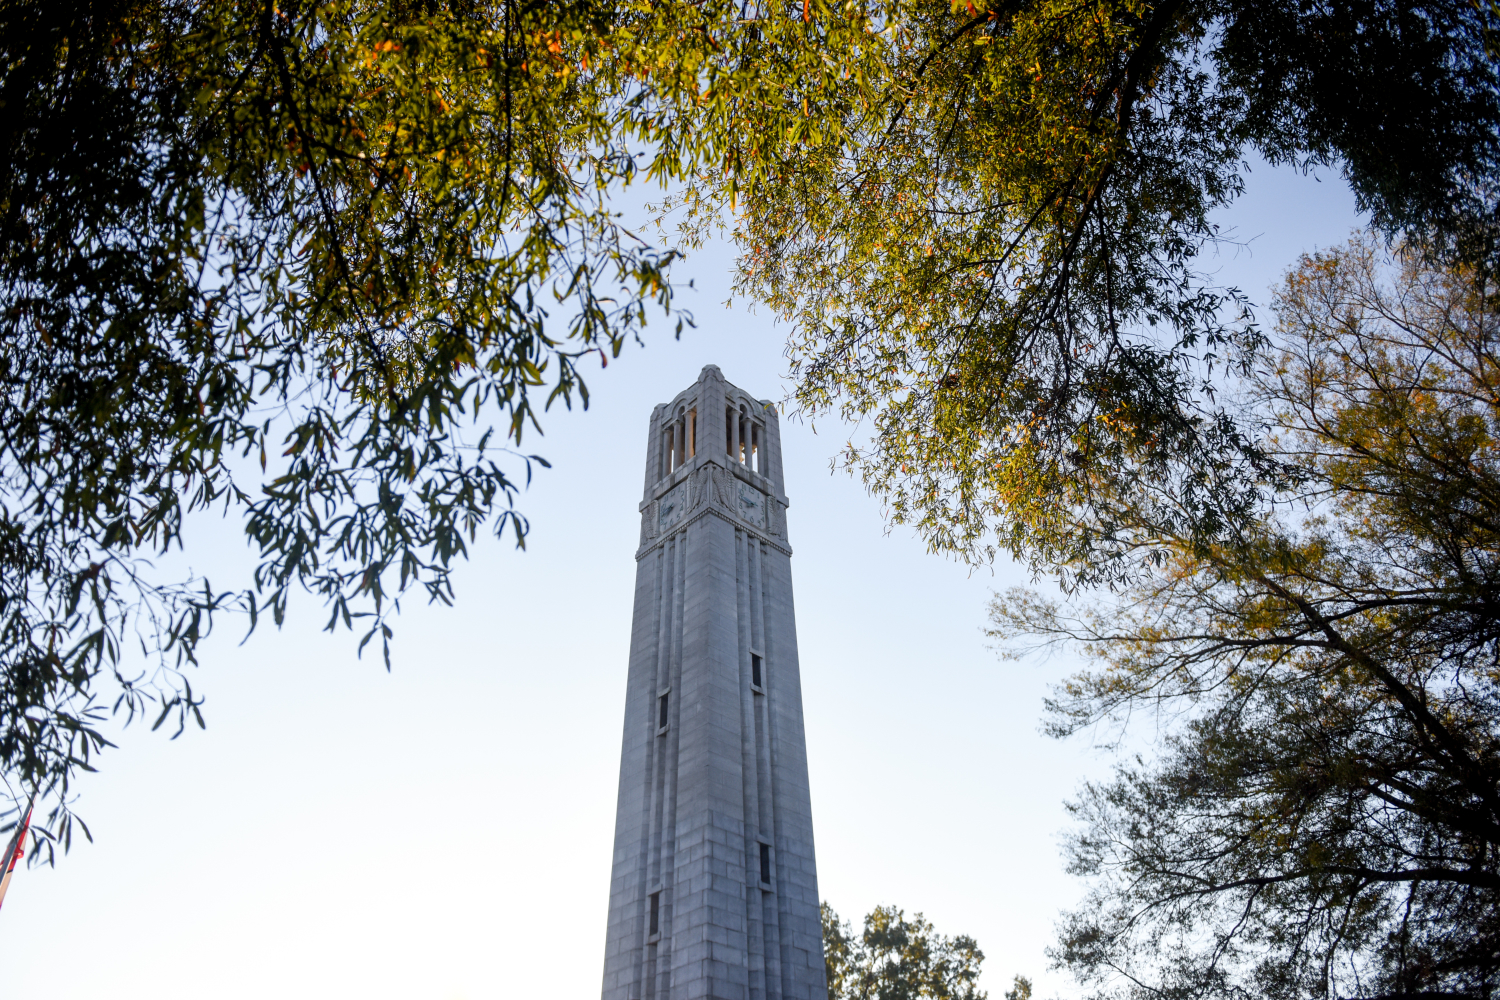 belltower surrounded by leaves